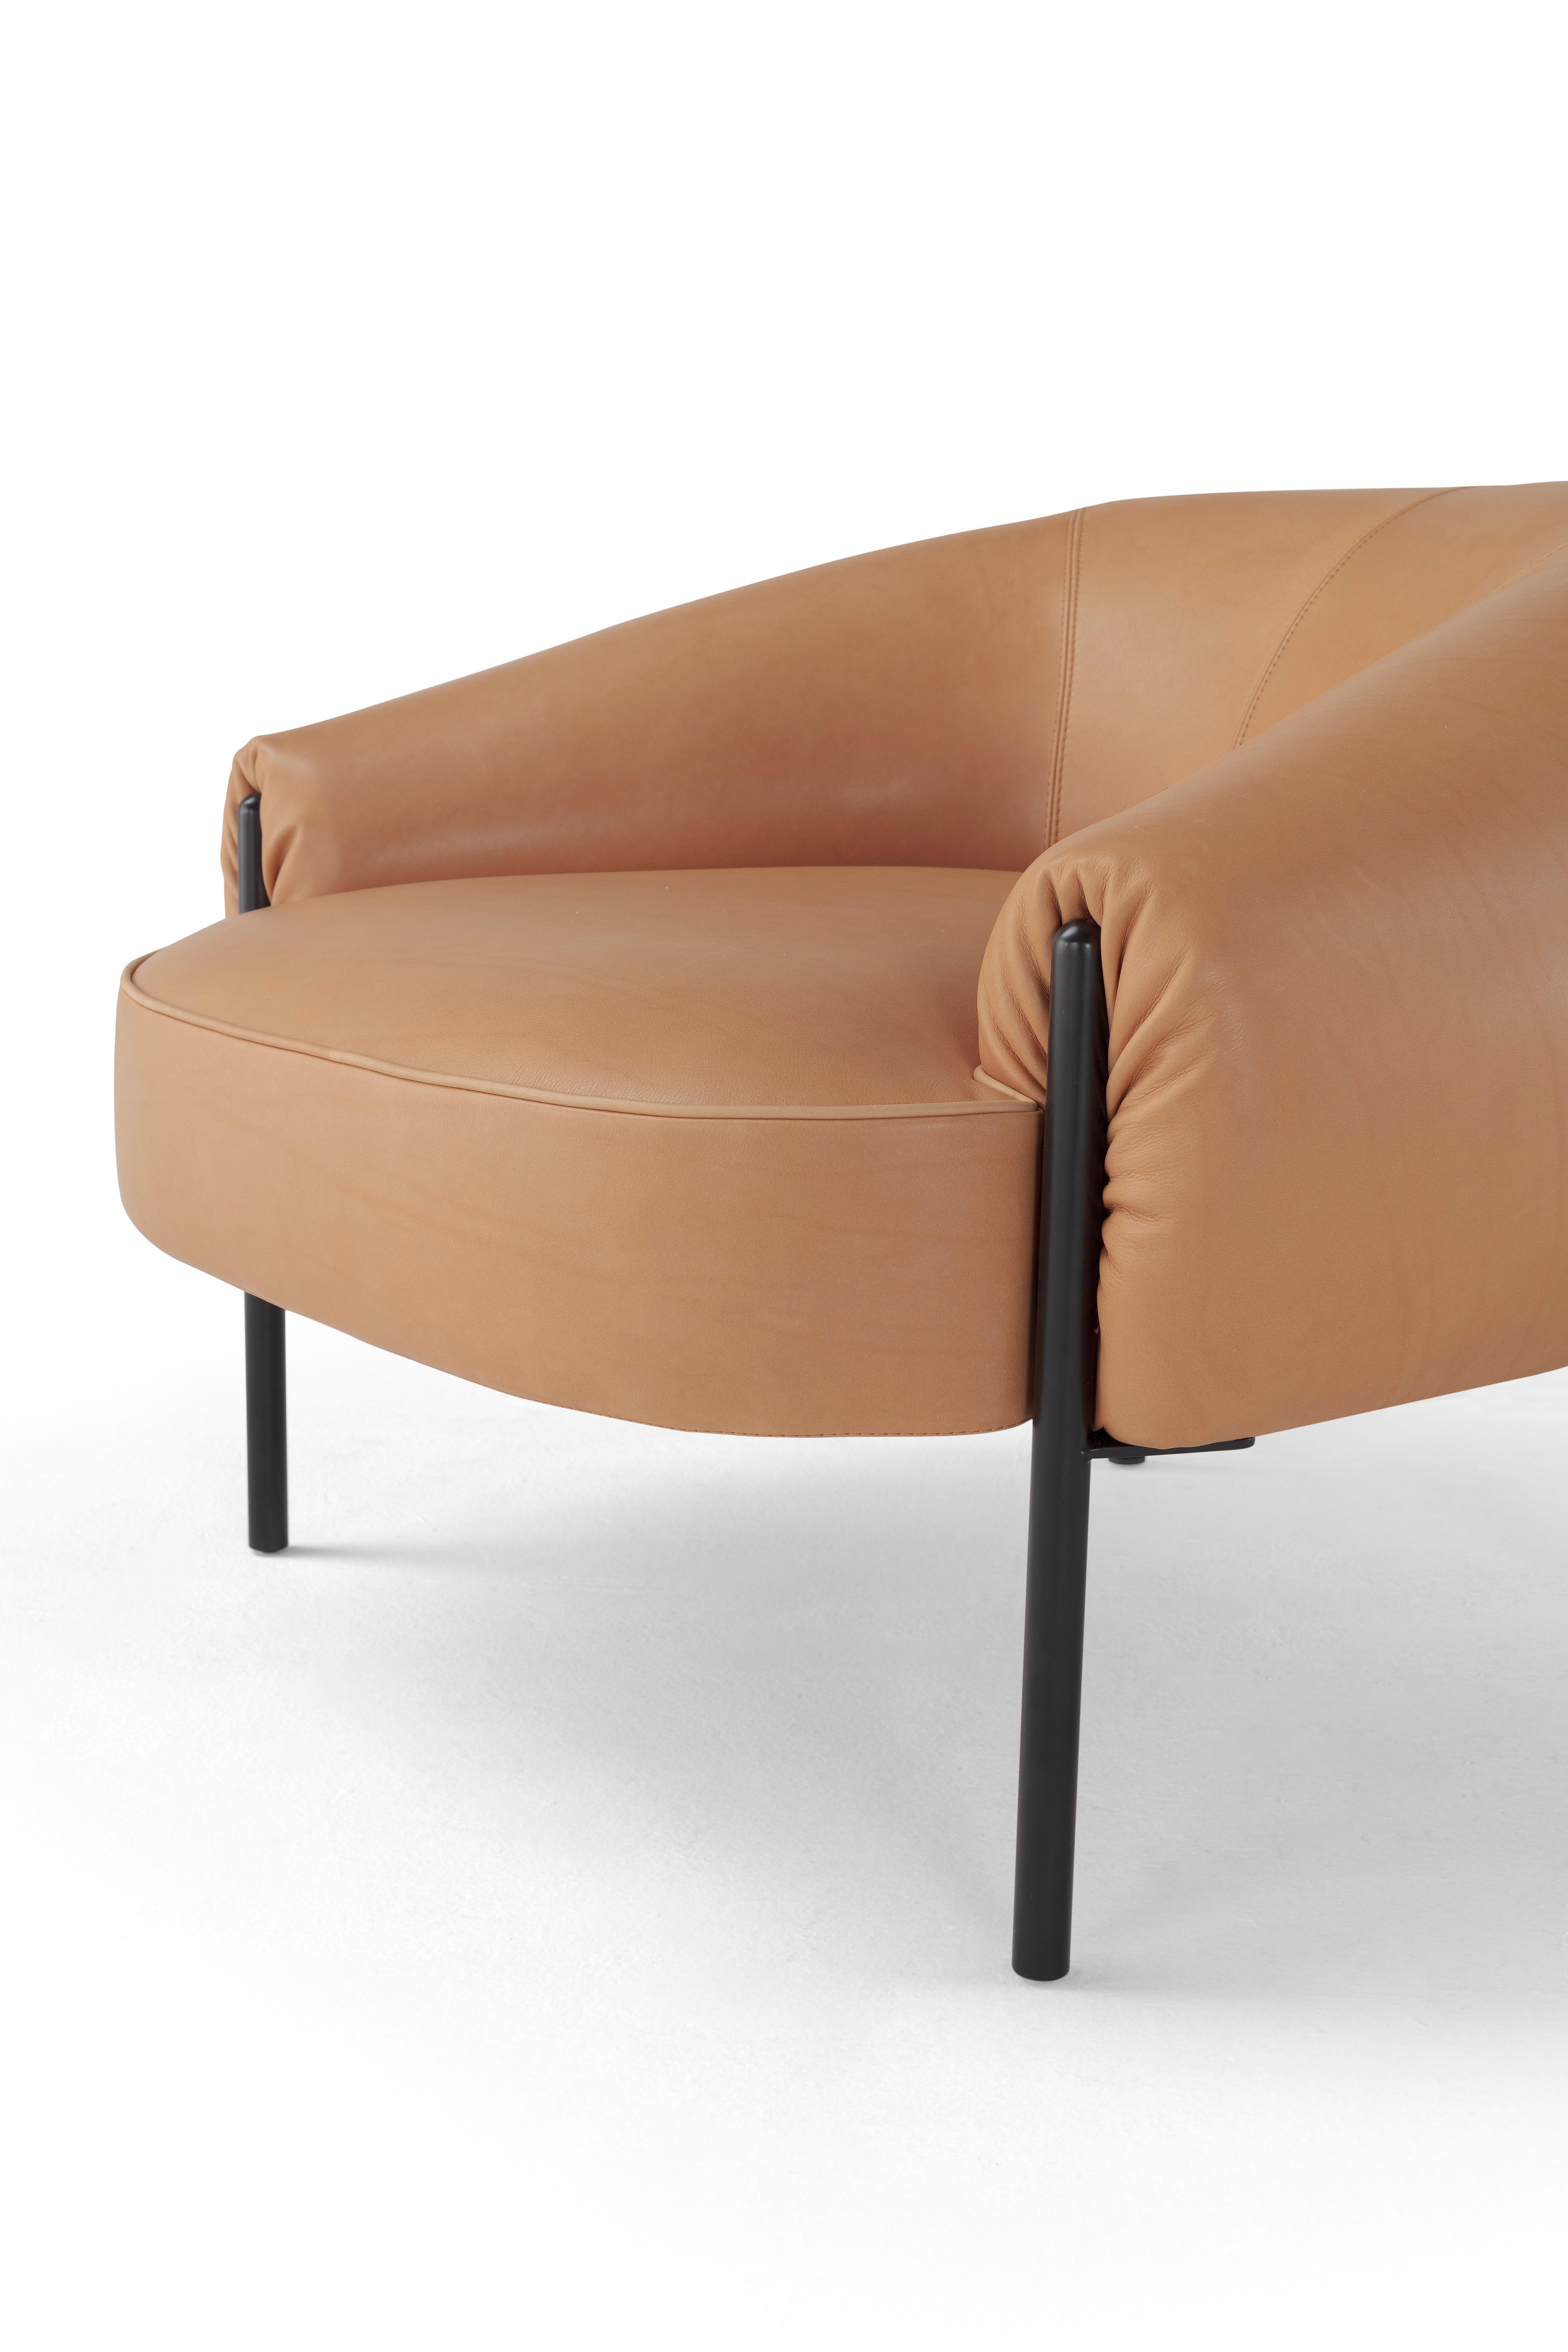 Contemporary Armchair 'Isola' by Amura Lab, Daino 01 For Sale 1